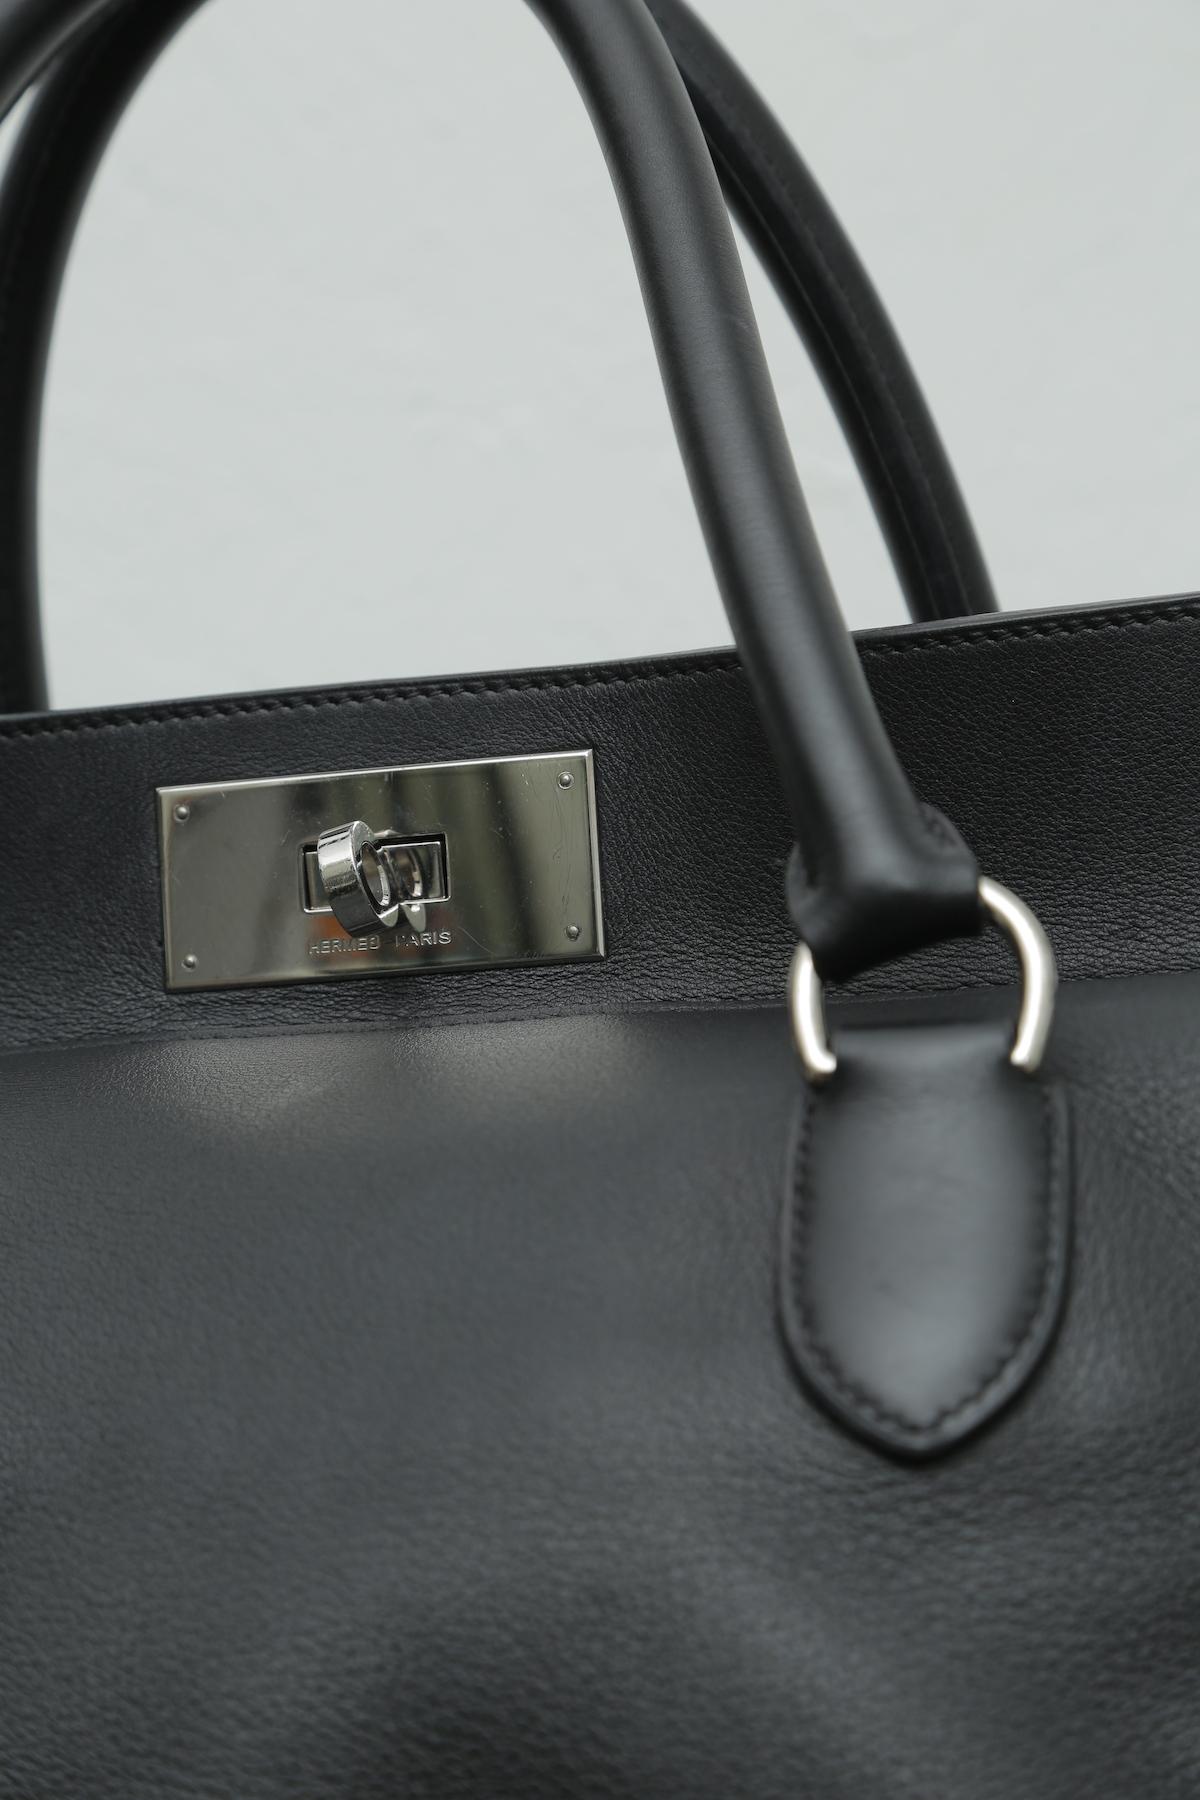 
Hermes black toolbox 33 with silver hardware and detachable shoulder strap. This bag features dual rolled top handles, soft frame top and palladium tone hardware. Its turn lock closure opens to a beige fabric interior with patch pockets. This bag